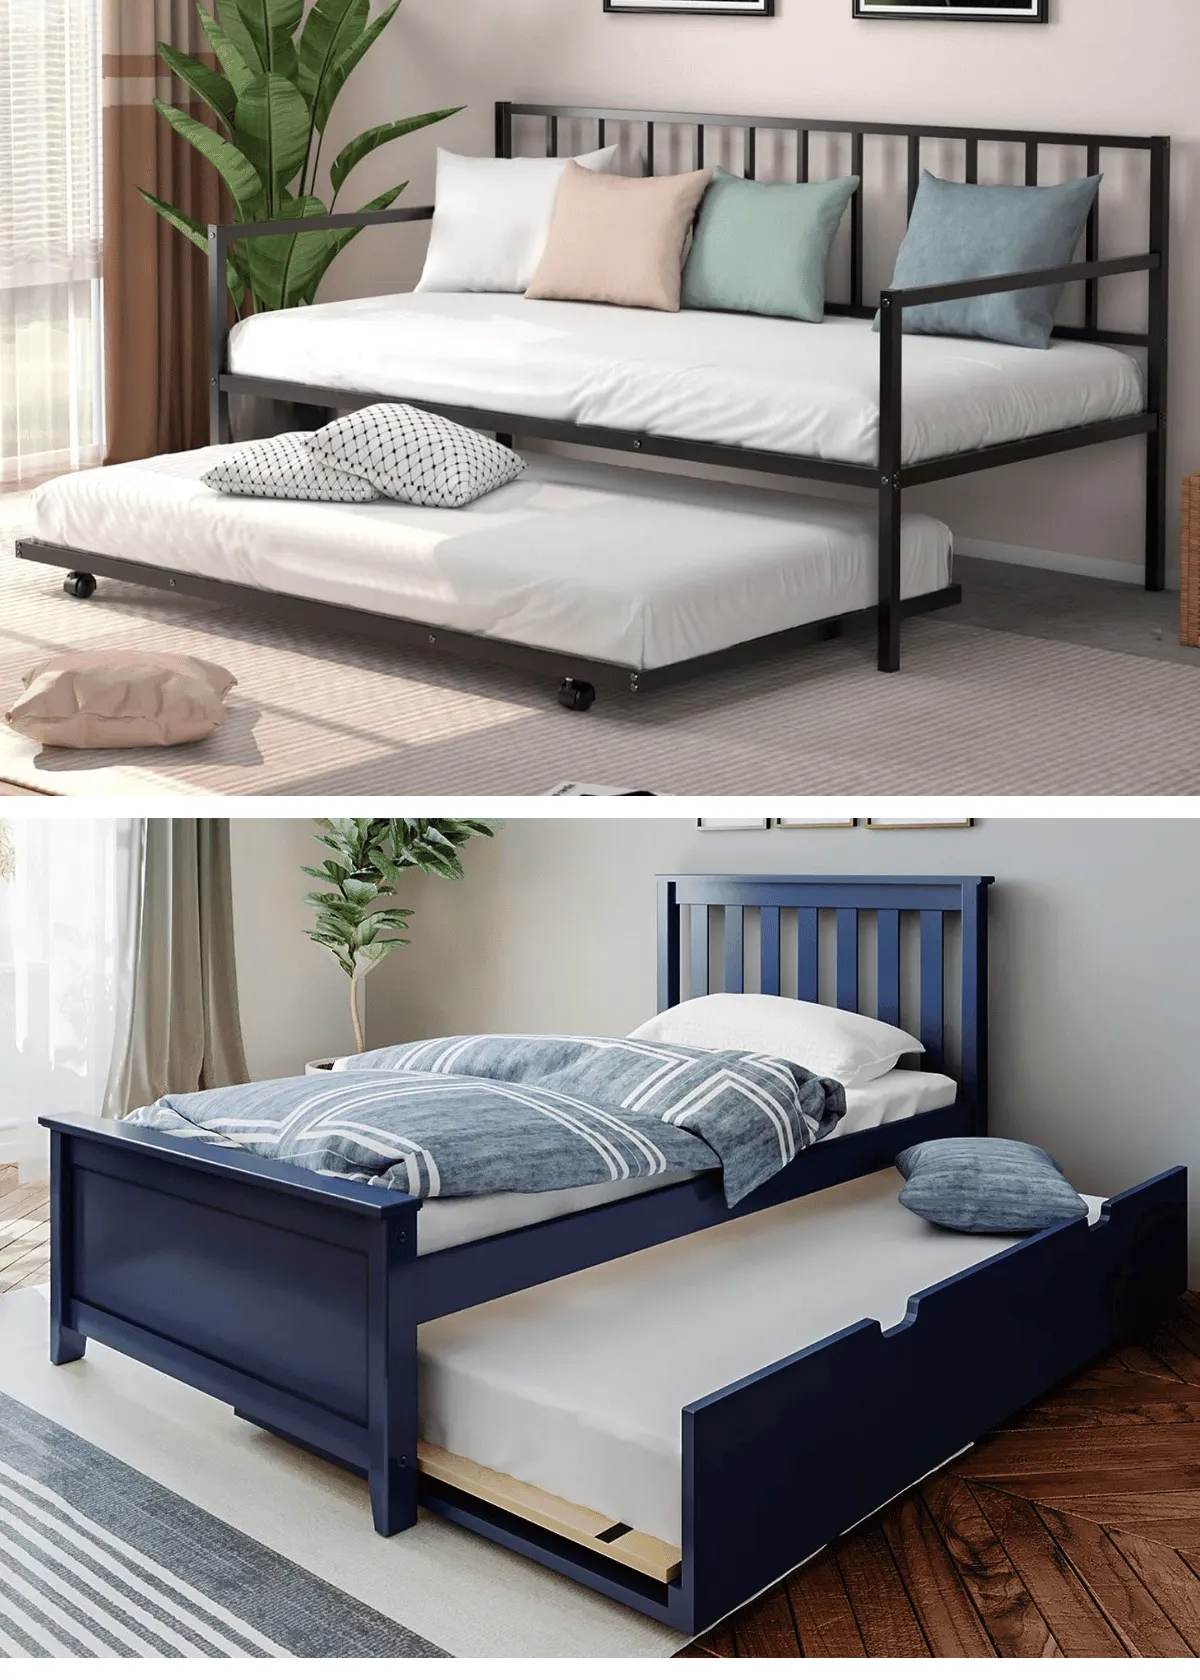 "Is the Trundle Bed The Best Pick for Your Small Space Living?"